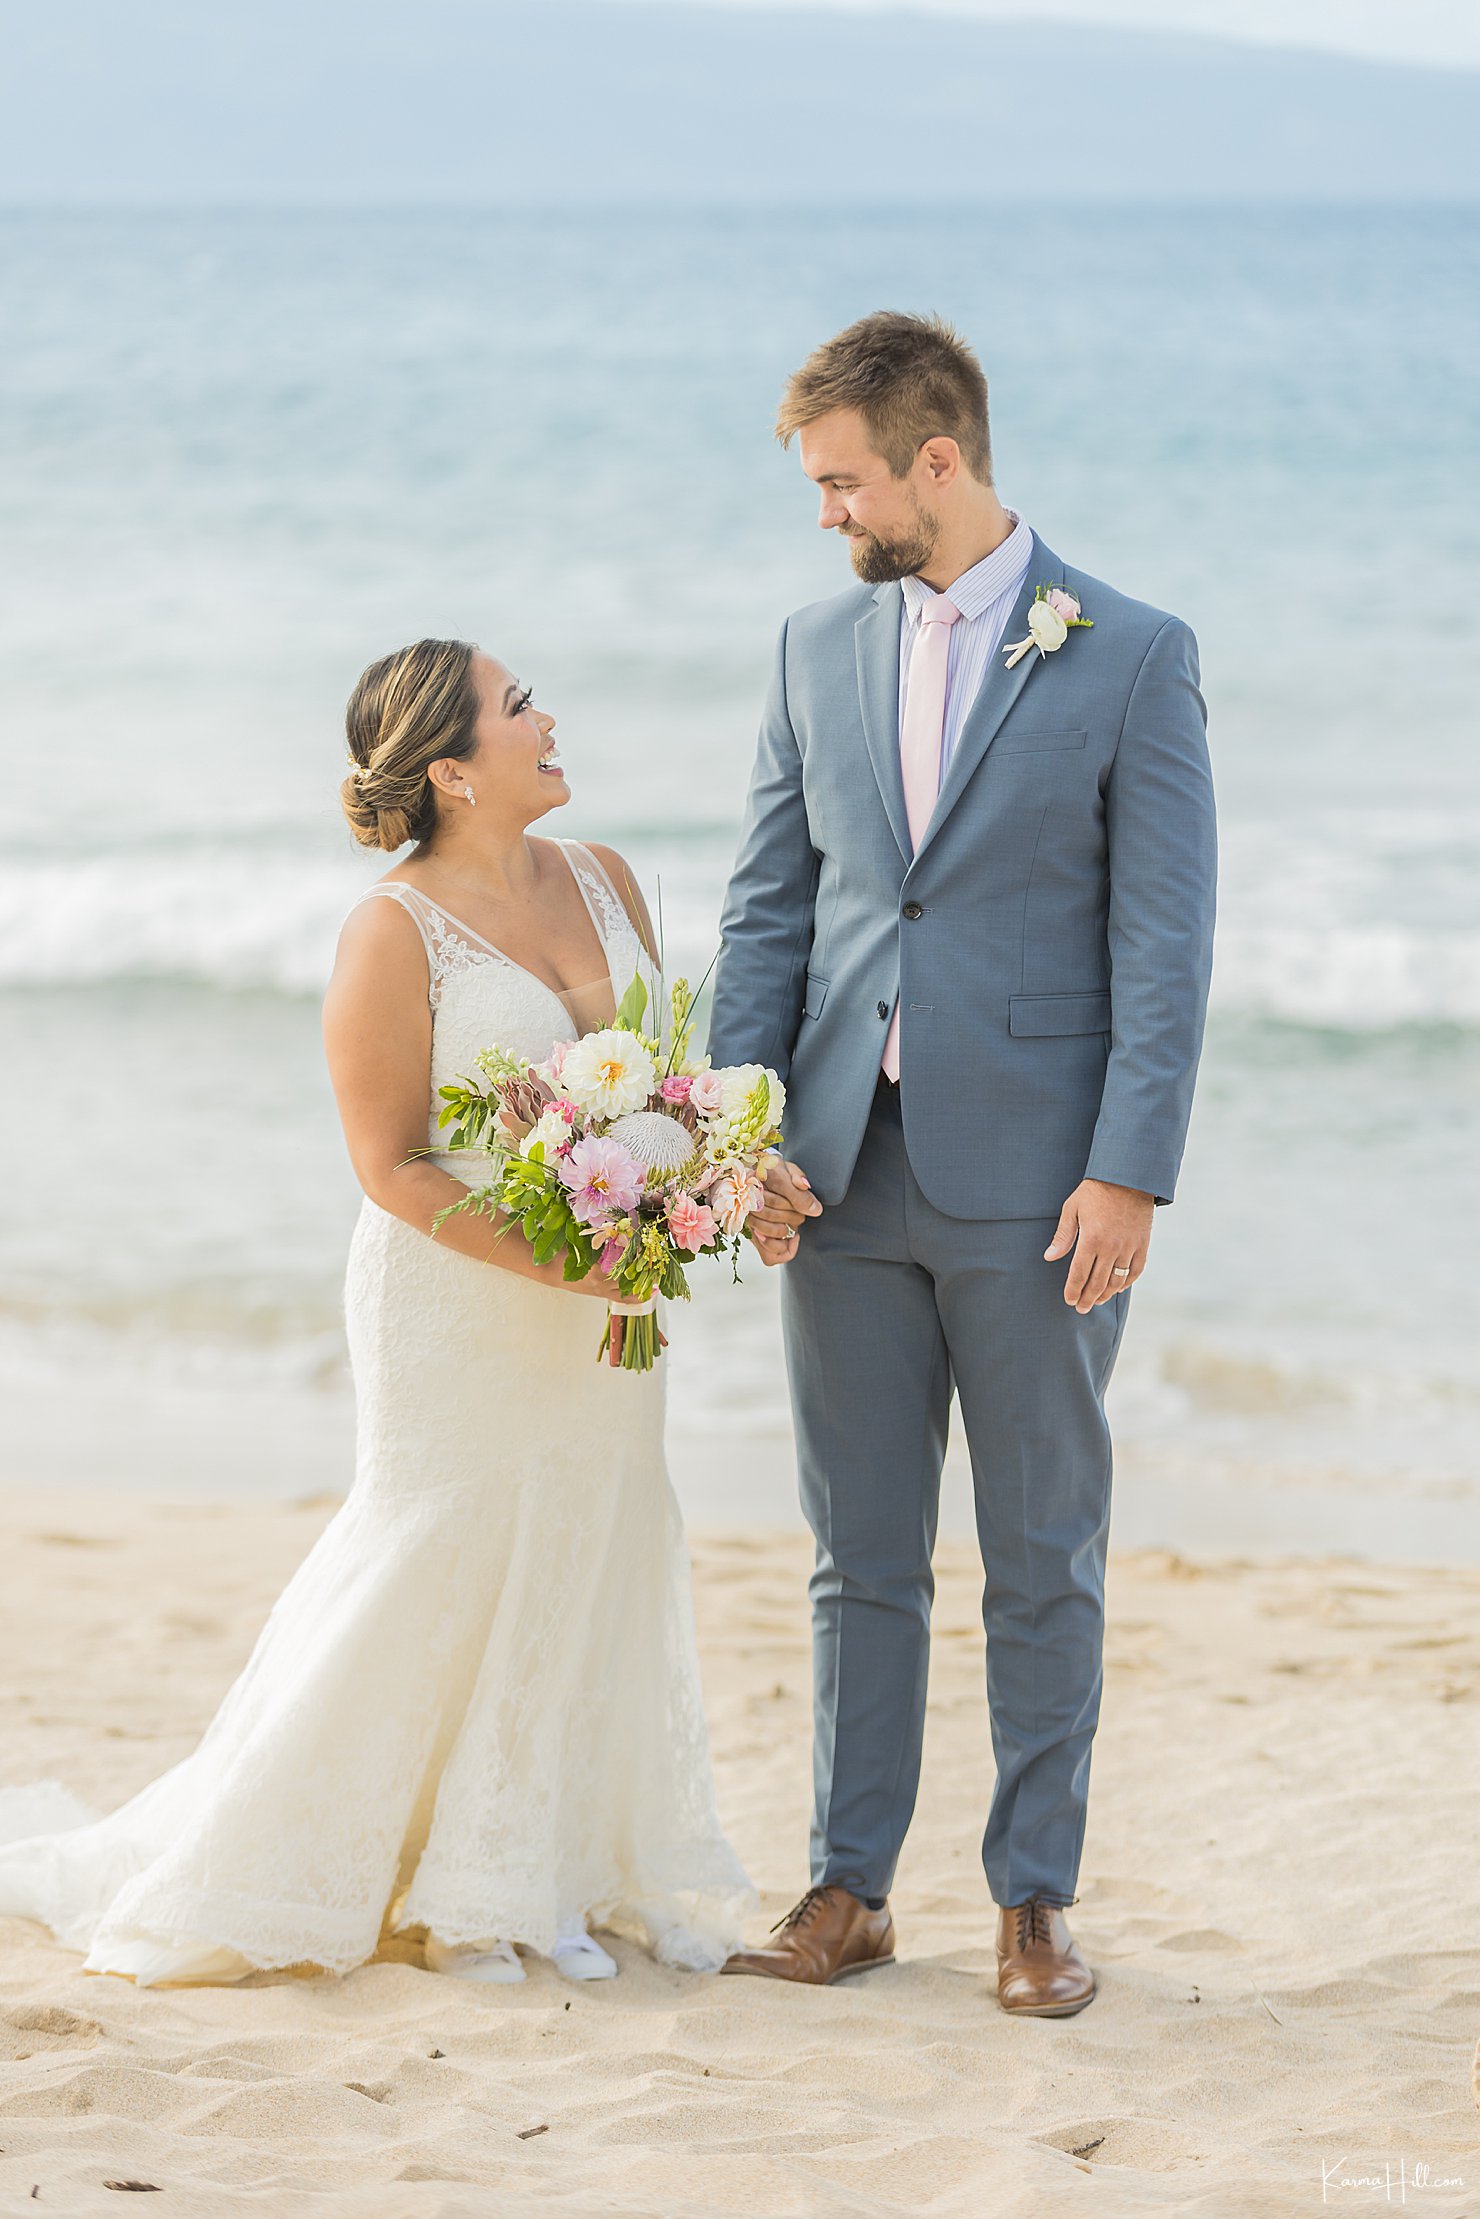 where to have a beach wedding in Maui